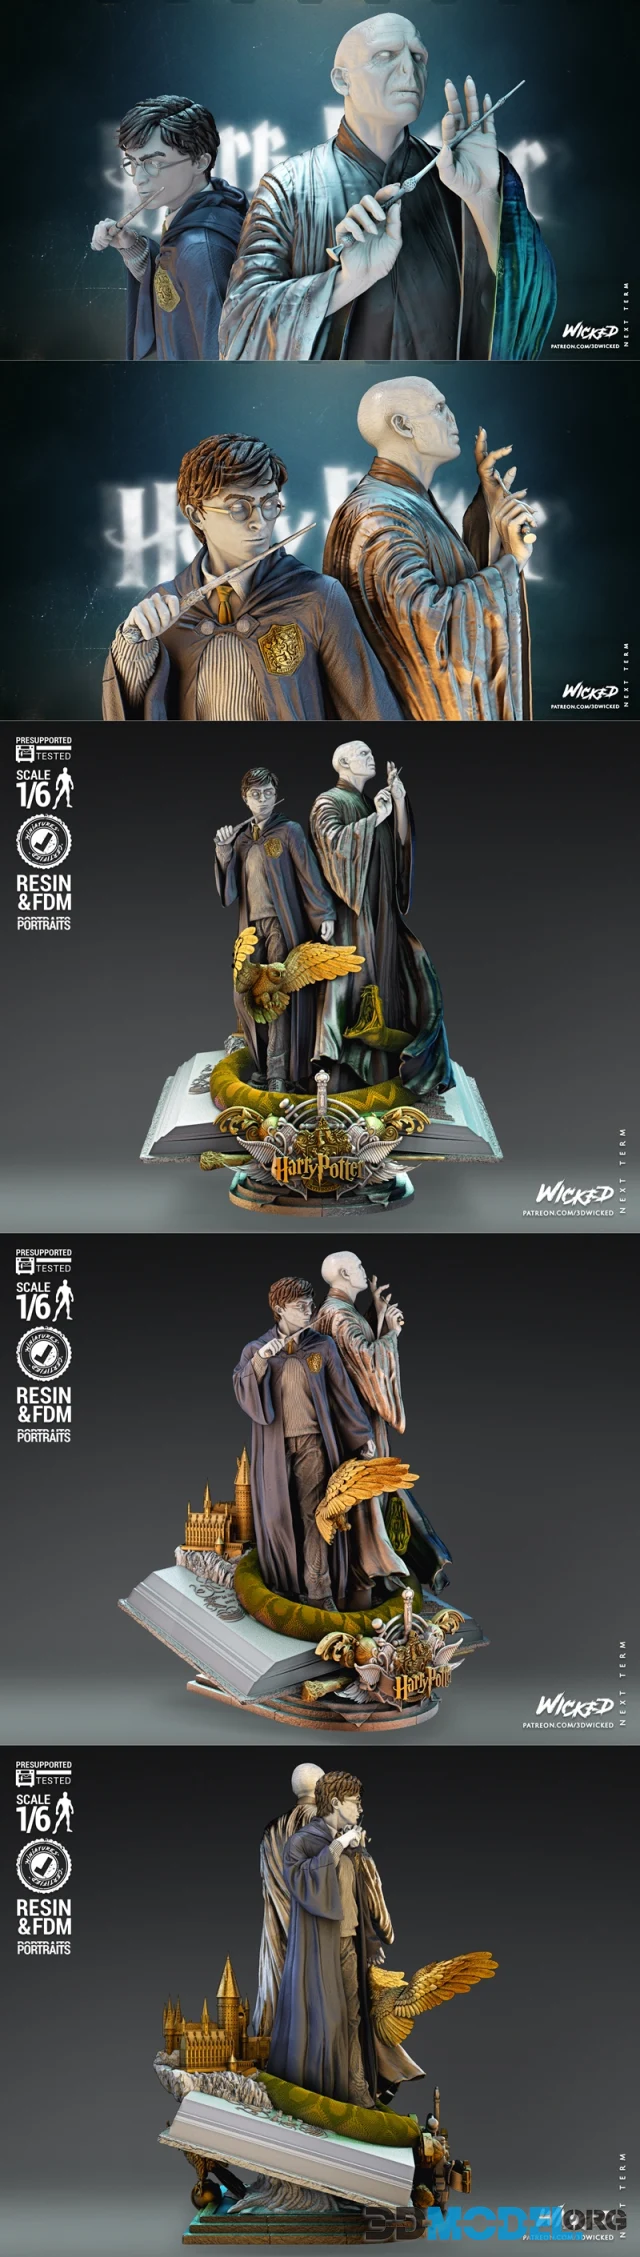 Wicked - Diorama Harry Potter and Voldemort – Printable